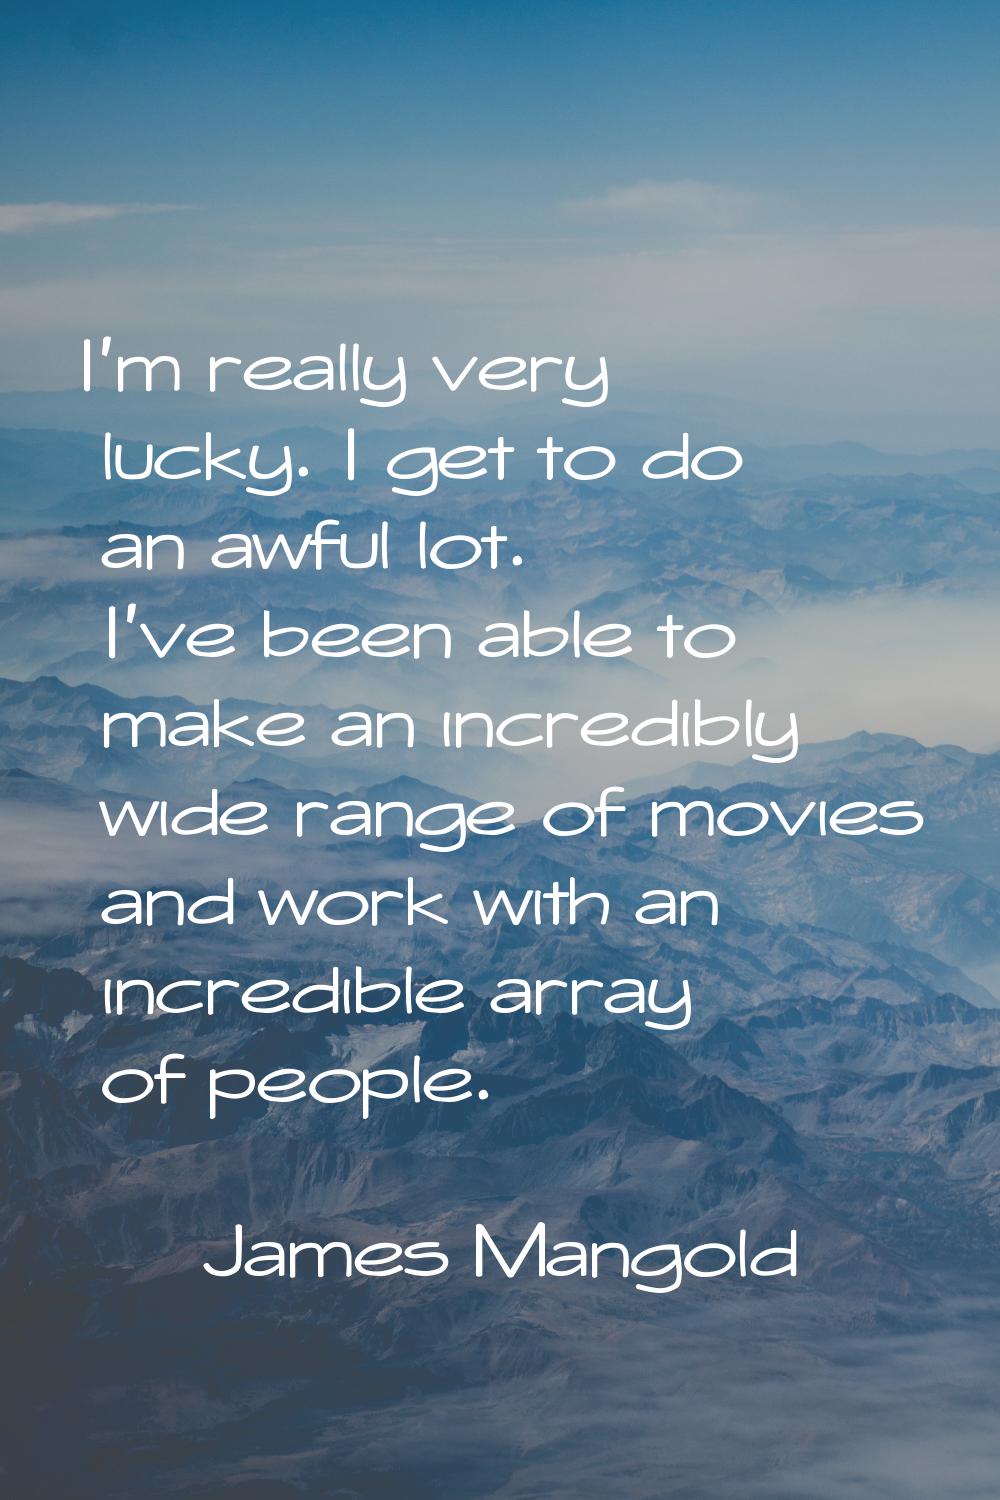 I'm really very lucky. I get to do an awful lot. I've been able to make an incredibly wide range of